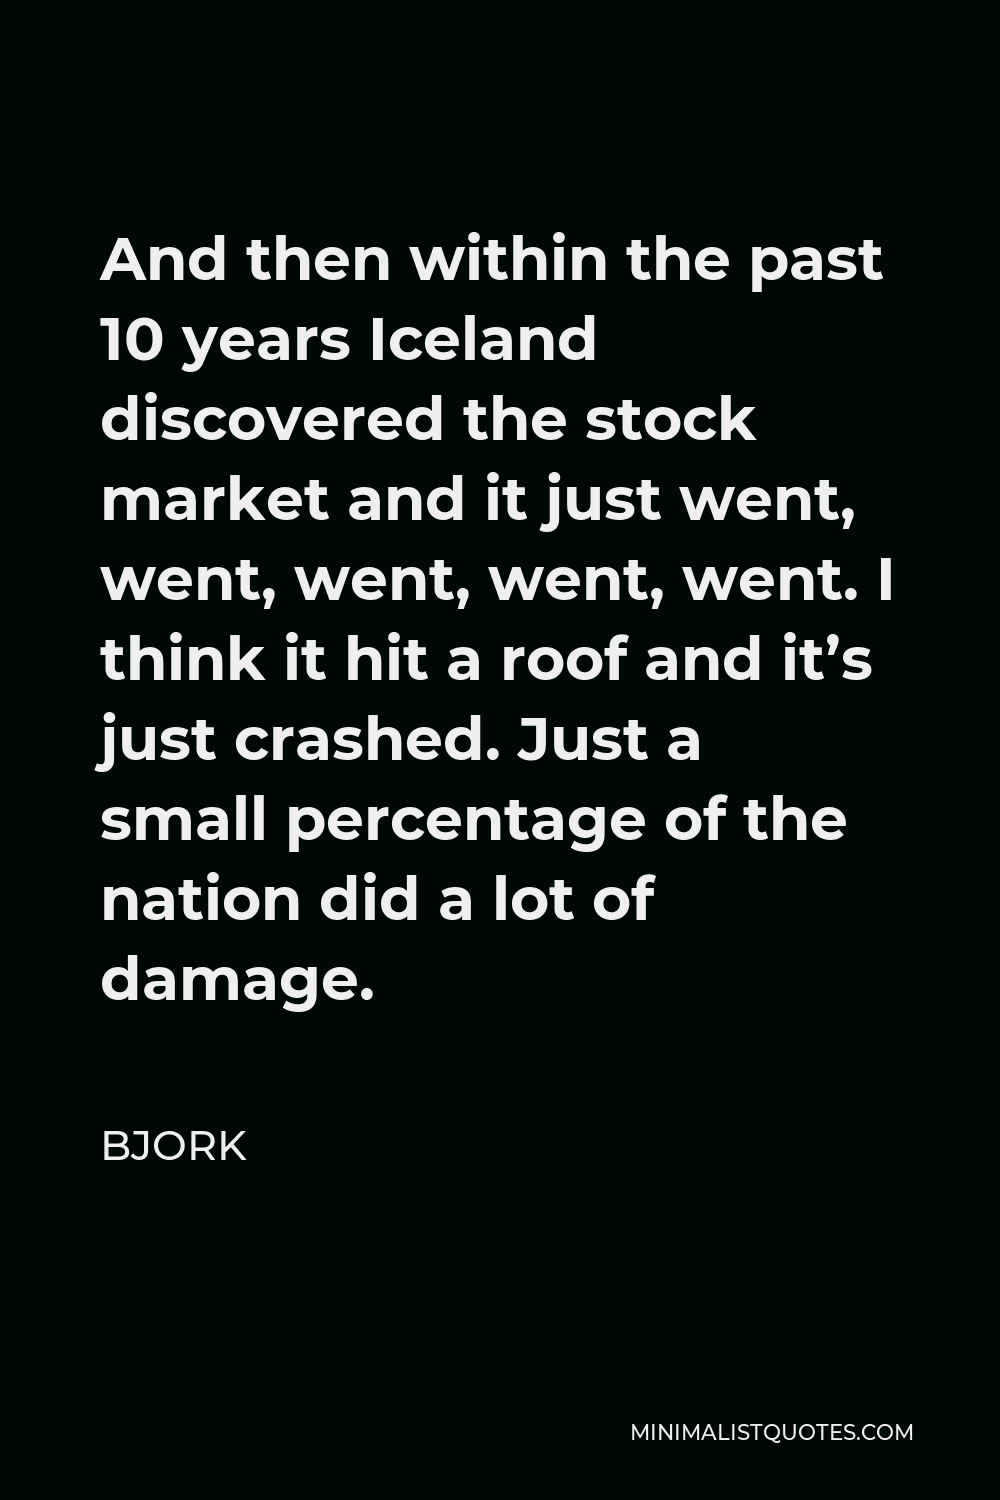 Bjork Quote - And then within the past 10 years Iceland discovered the stock market and it just went, went, went, went, went. I think it hit a roof and it’s just crashed. Just a small percentage of the nation did a lot of damage.